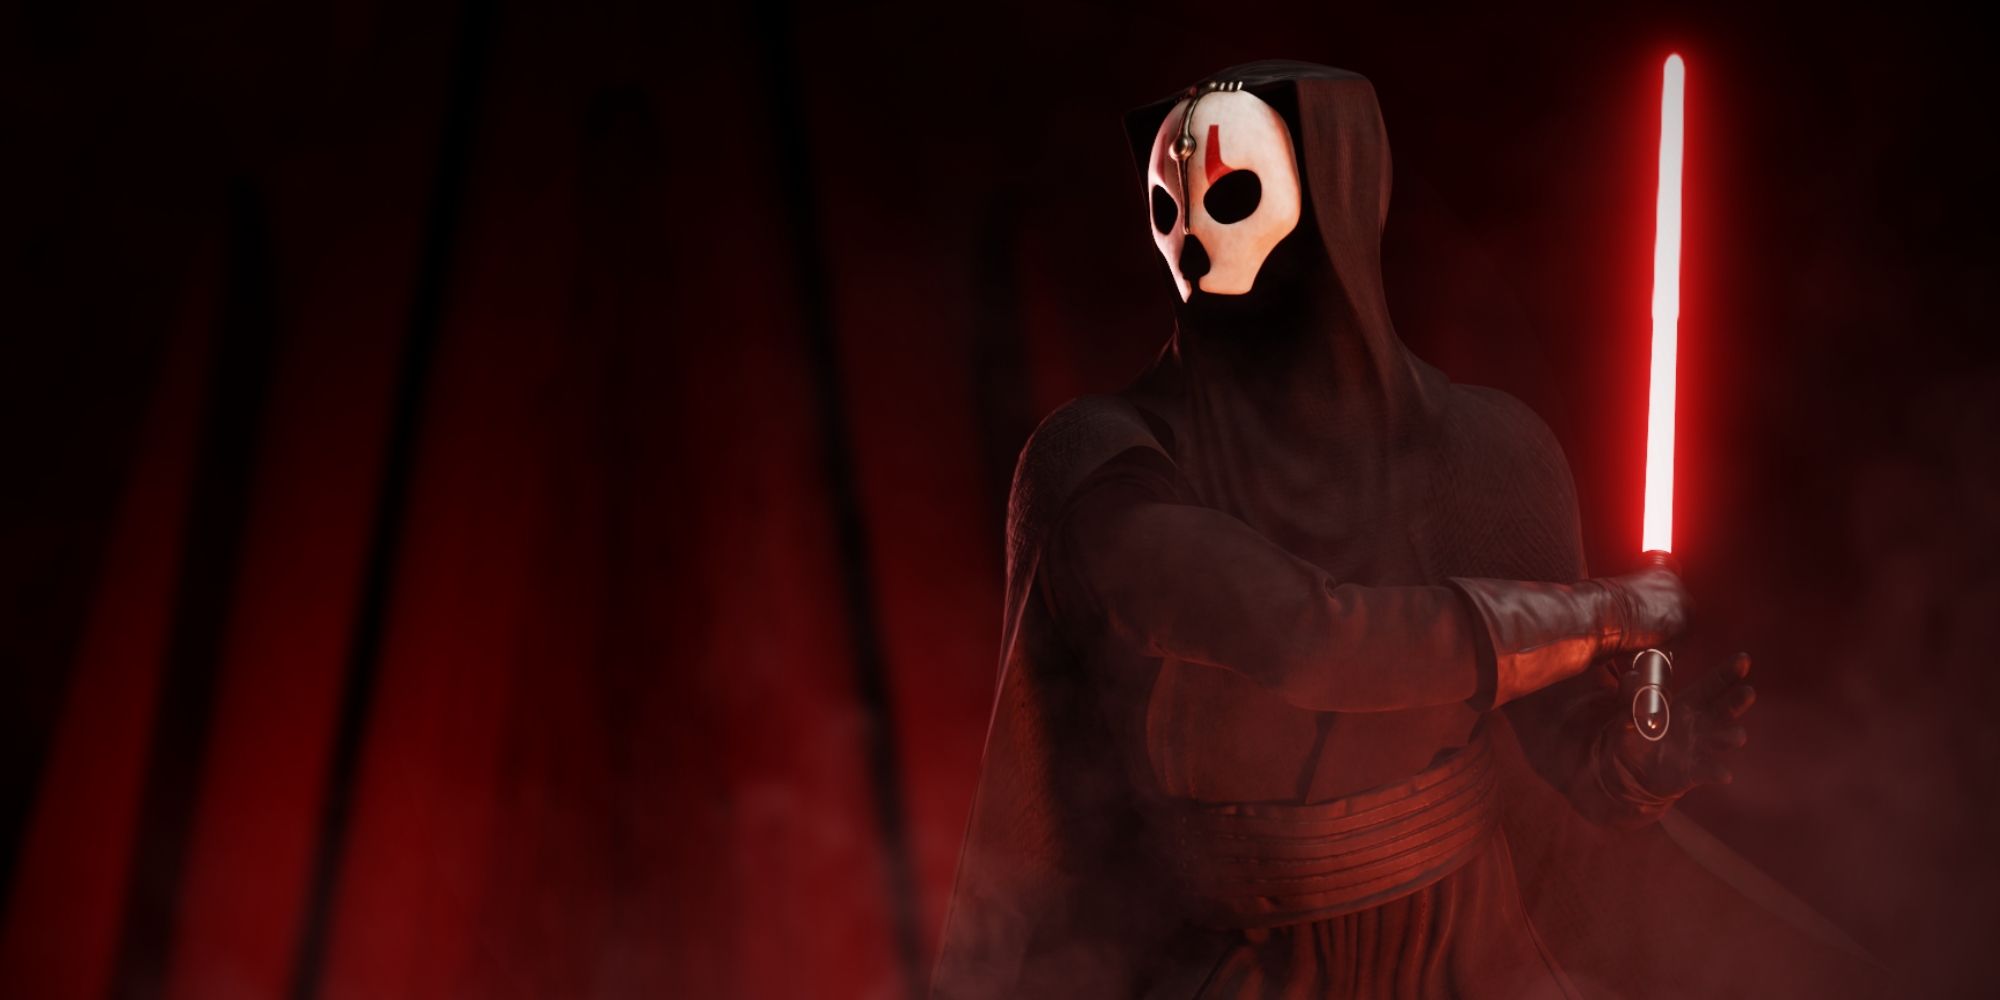 Star Wars': 10 Most Powerful Sith, to Reddit